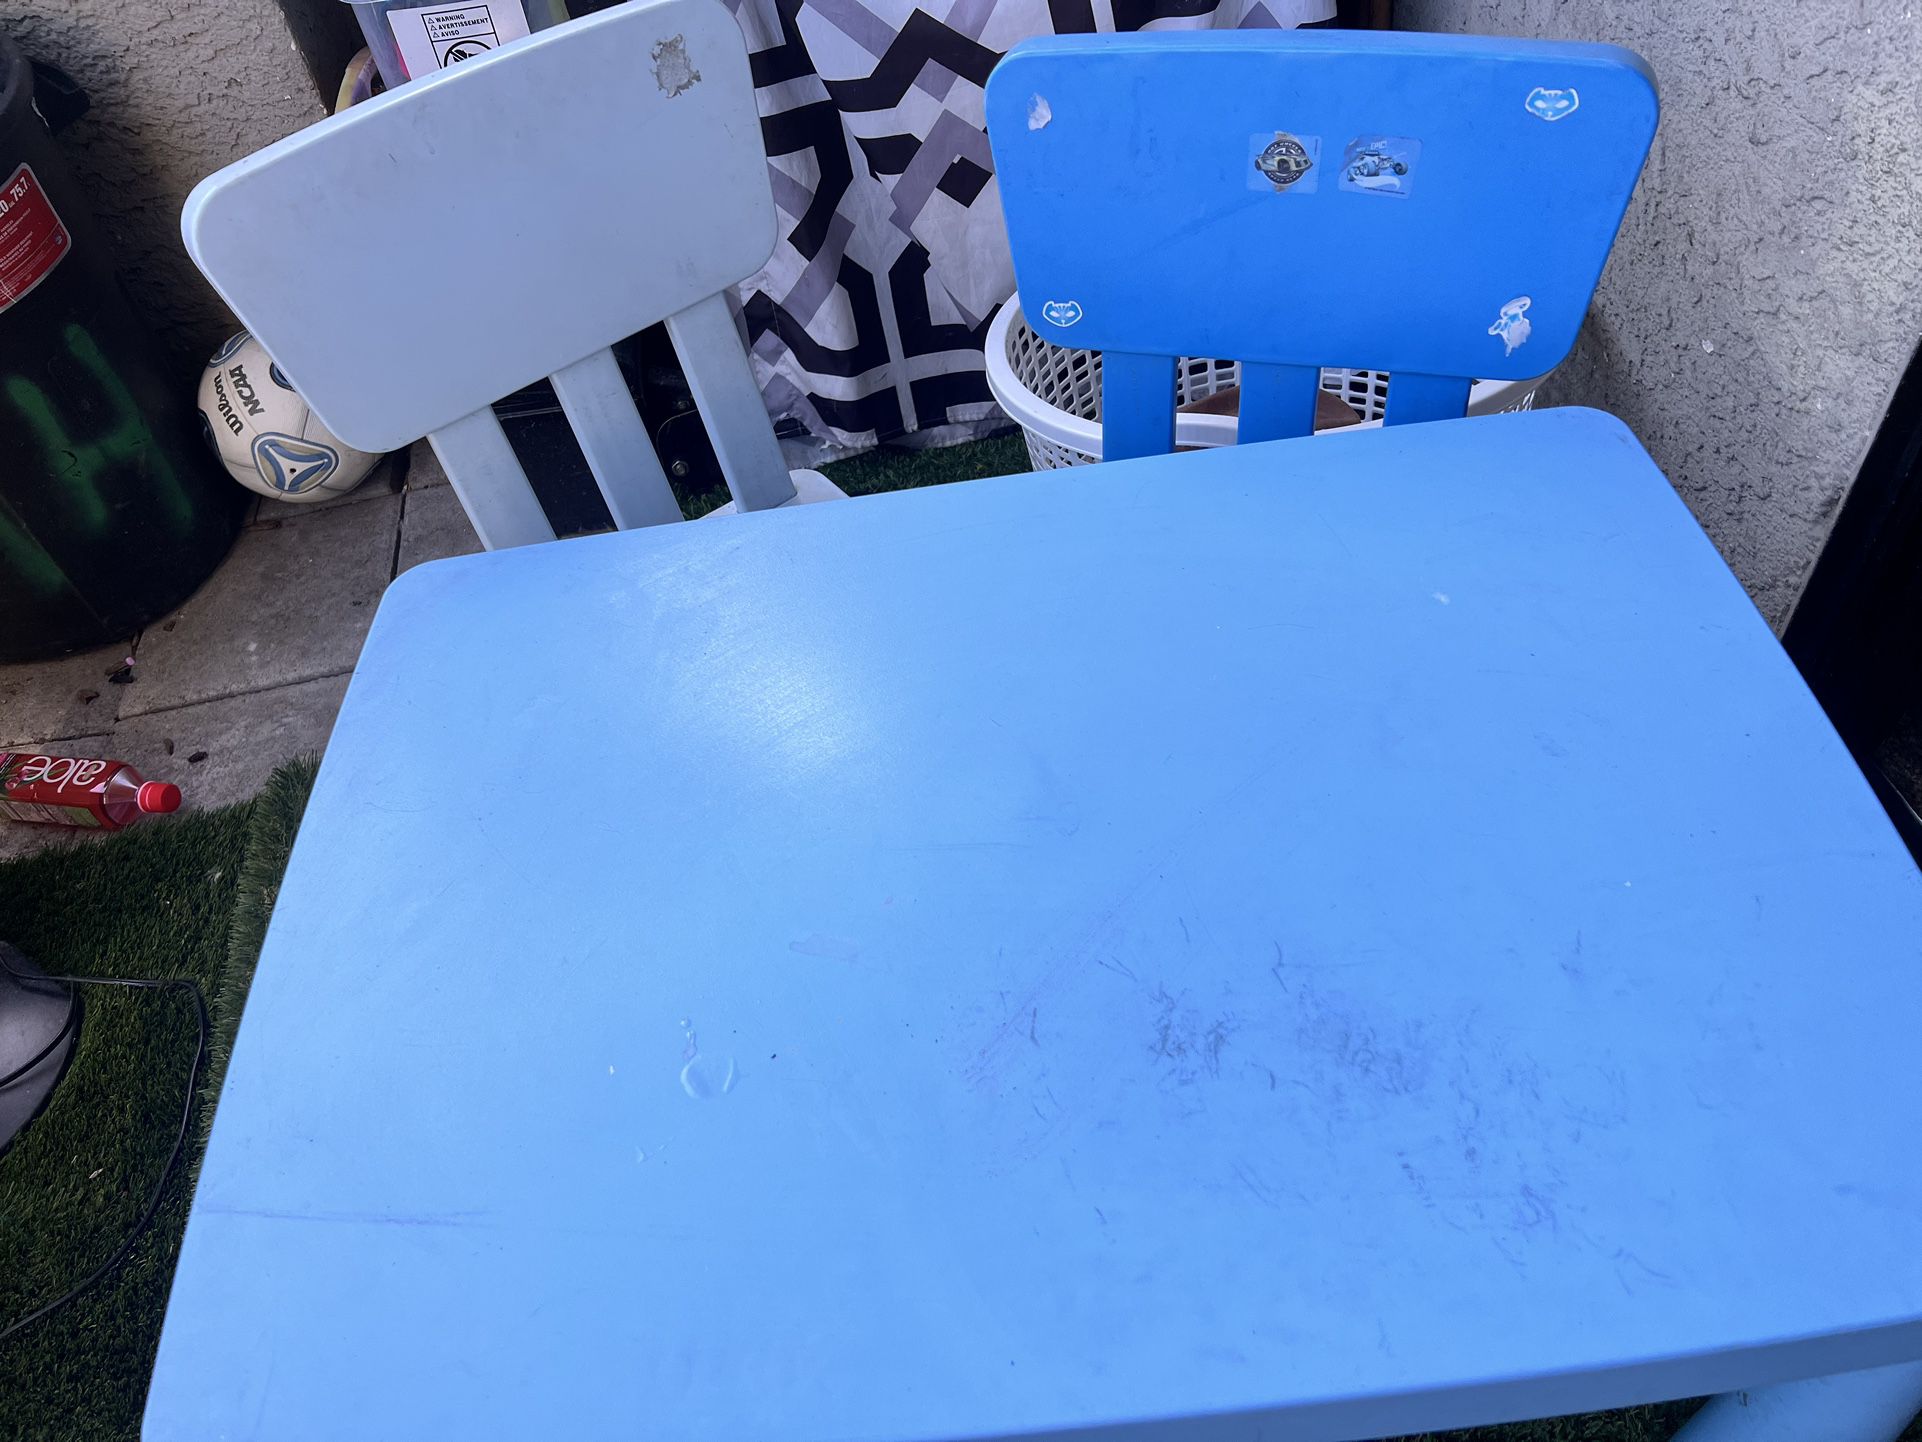 Kids Play Table In Good Condition Just Dirty